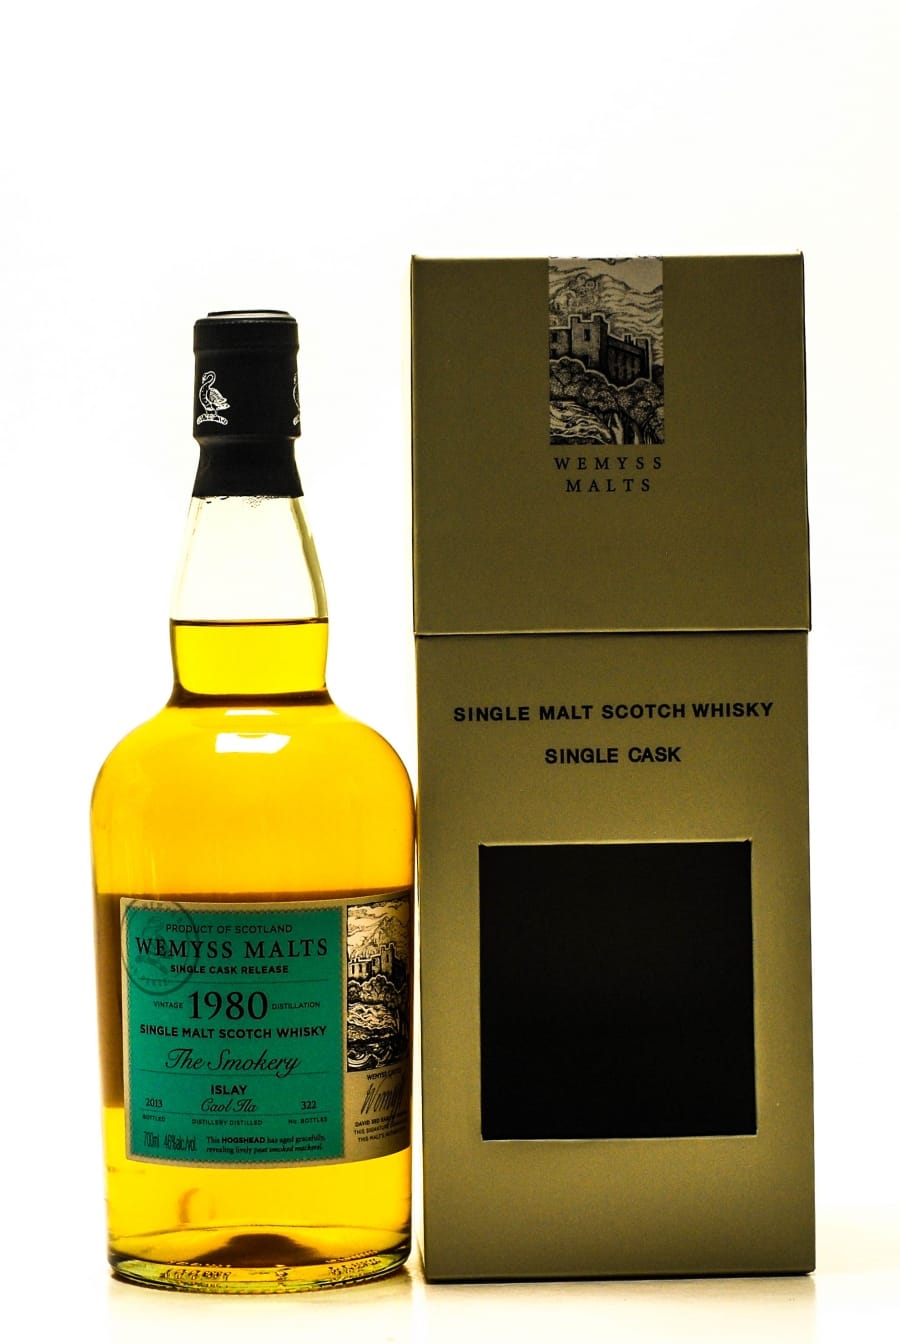 Caol Ila - Caol Ila 32 Years Old The Smokery Wemyss Malts Distilled: 1980 Bottled: 2012 1 Of 322 Bottles 46% 1980 In Original Container